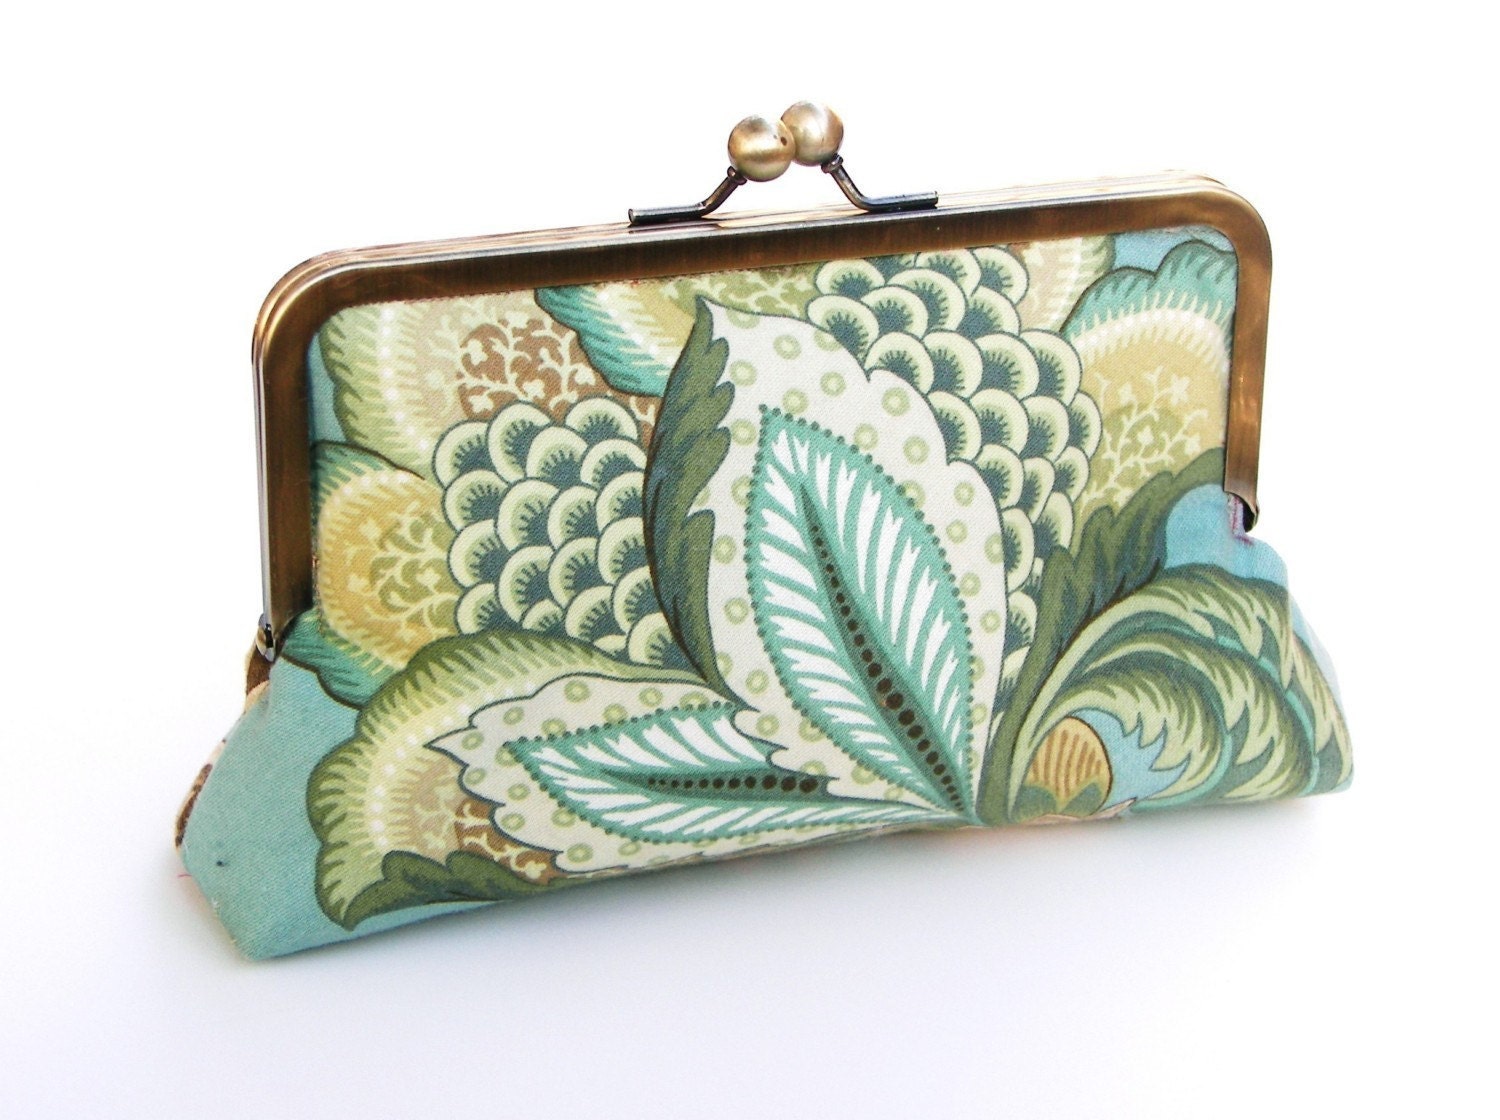 Small clutch with the image of a lotus in green, light blue, and yellow